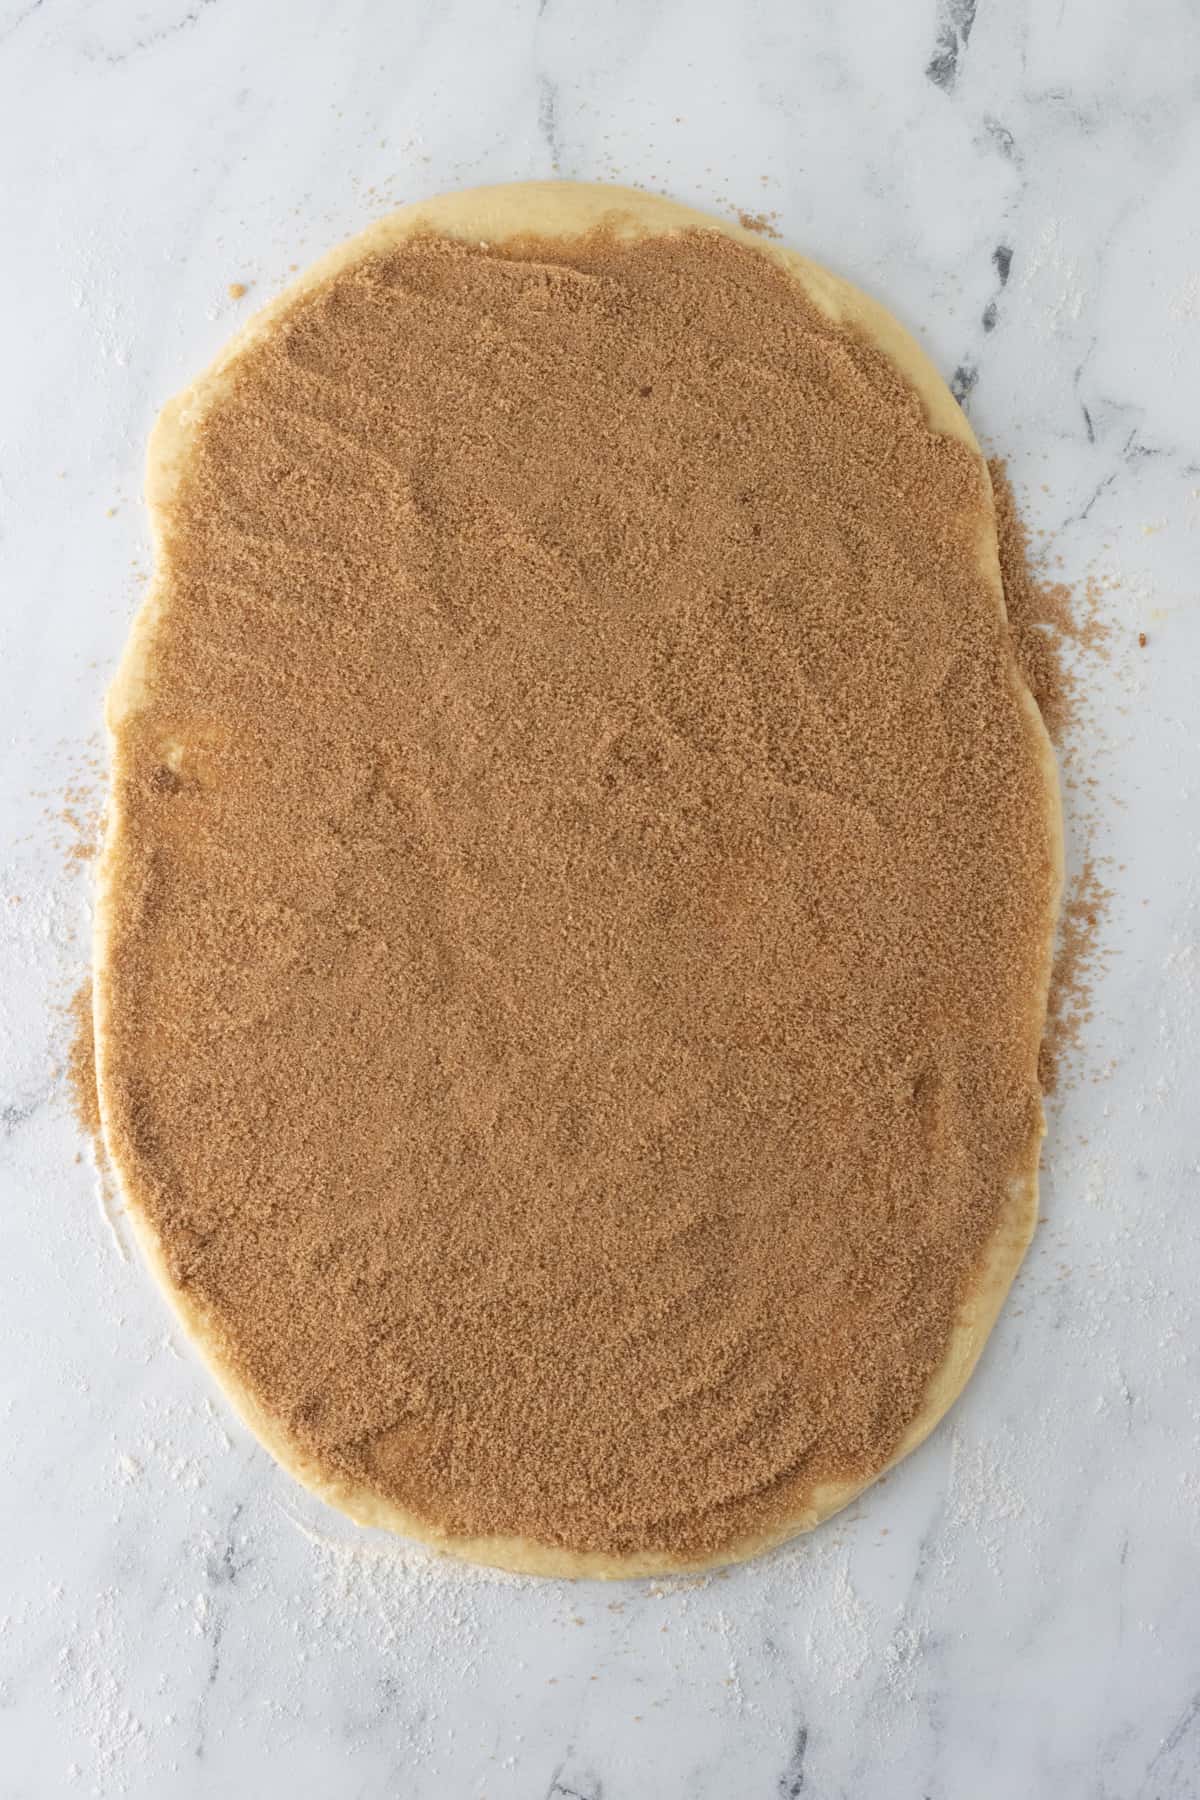 Dough rectangle covered with a cinnamon brown sugar mixture.